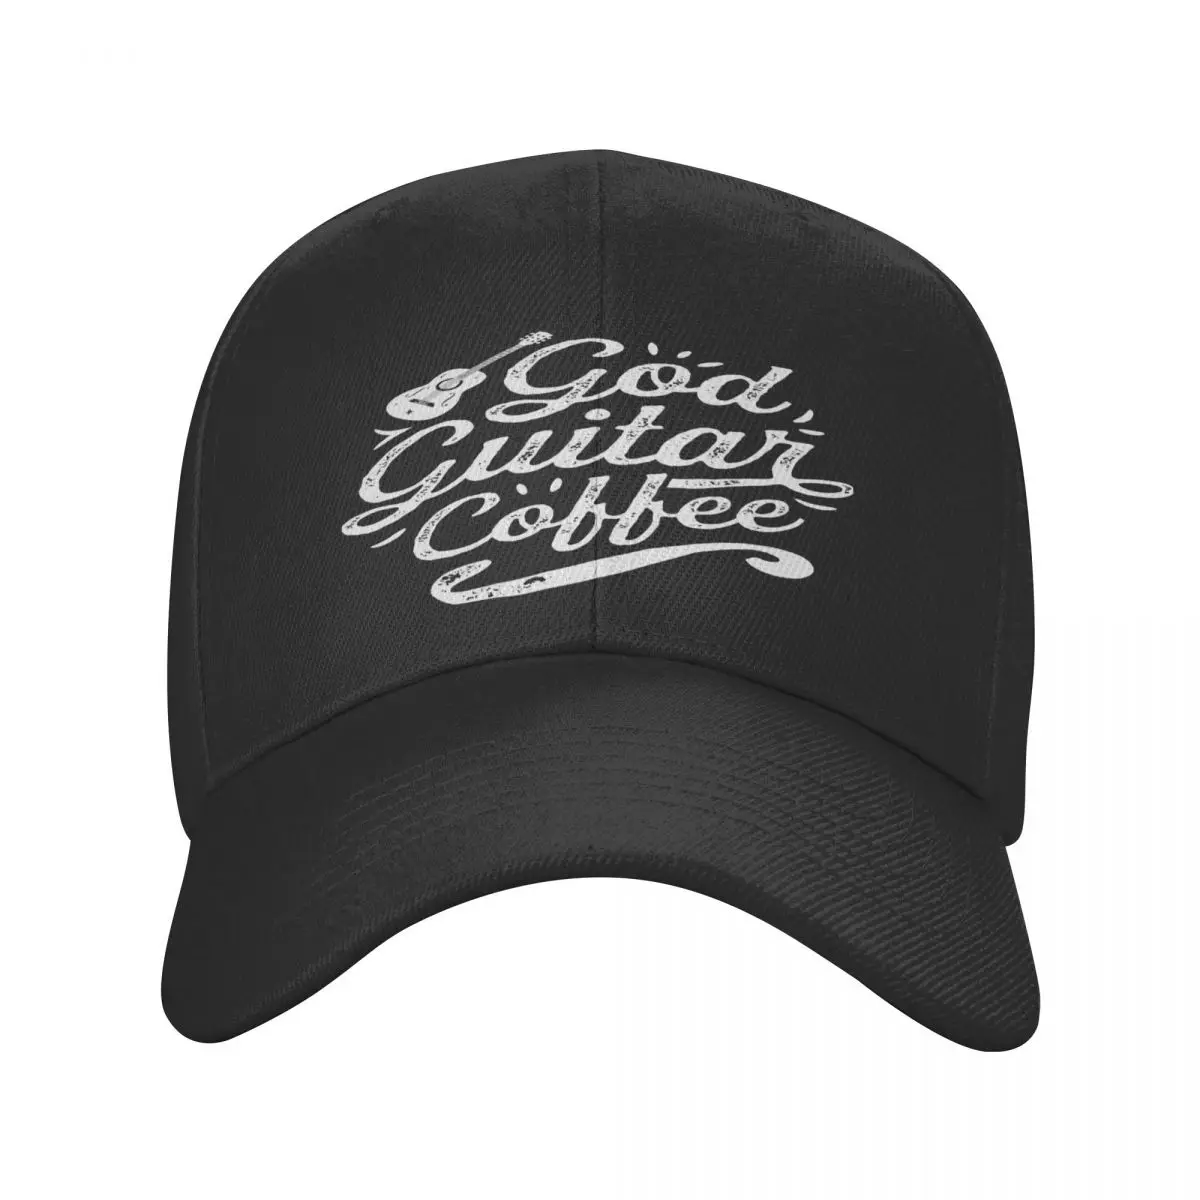 

God Guitar Coffee Music Lover Casquette, Polyester Cap Retro Cute Wind Practical Travel Nice Gift